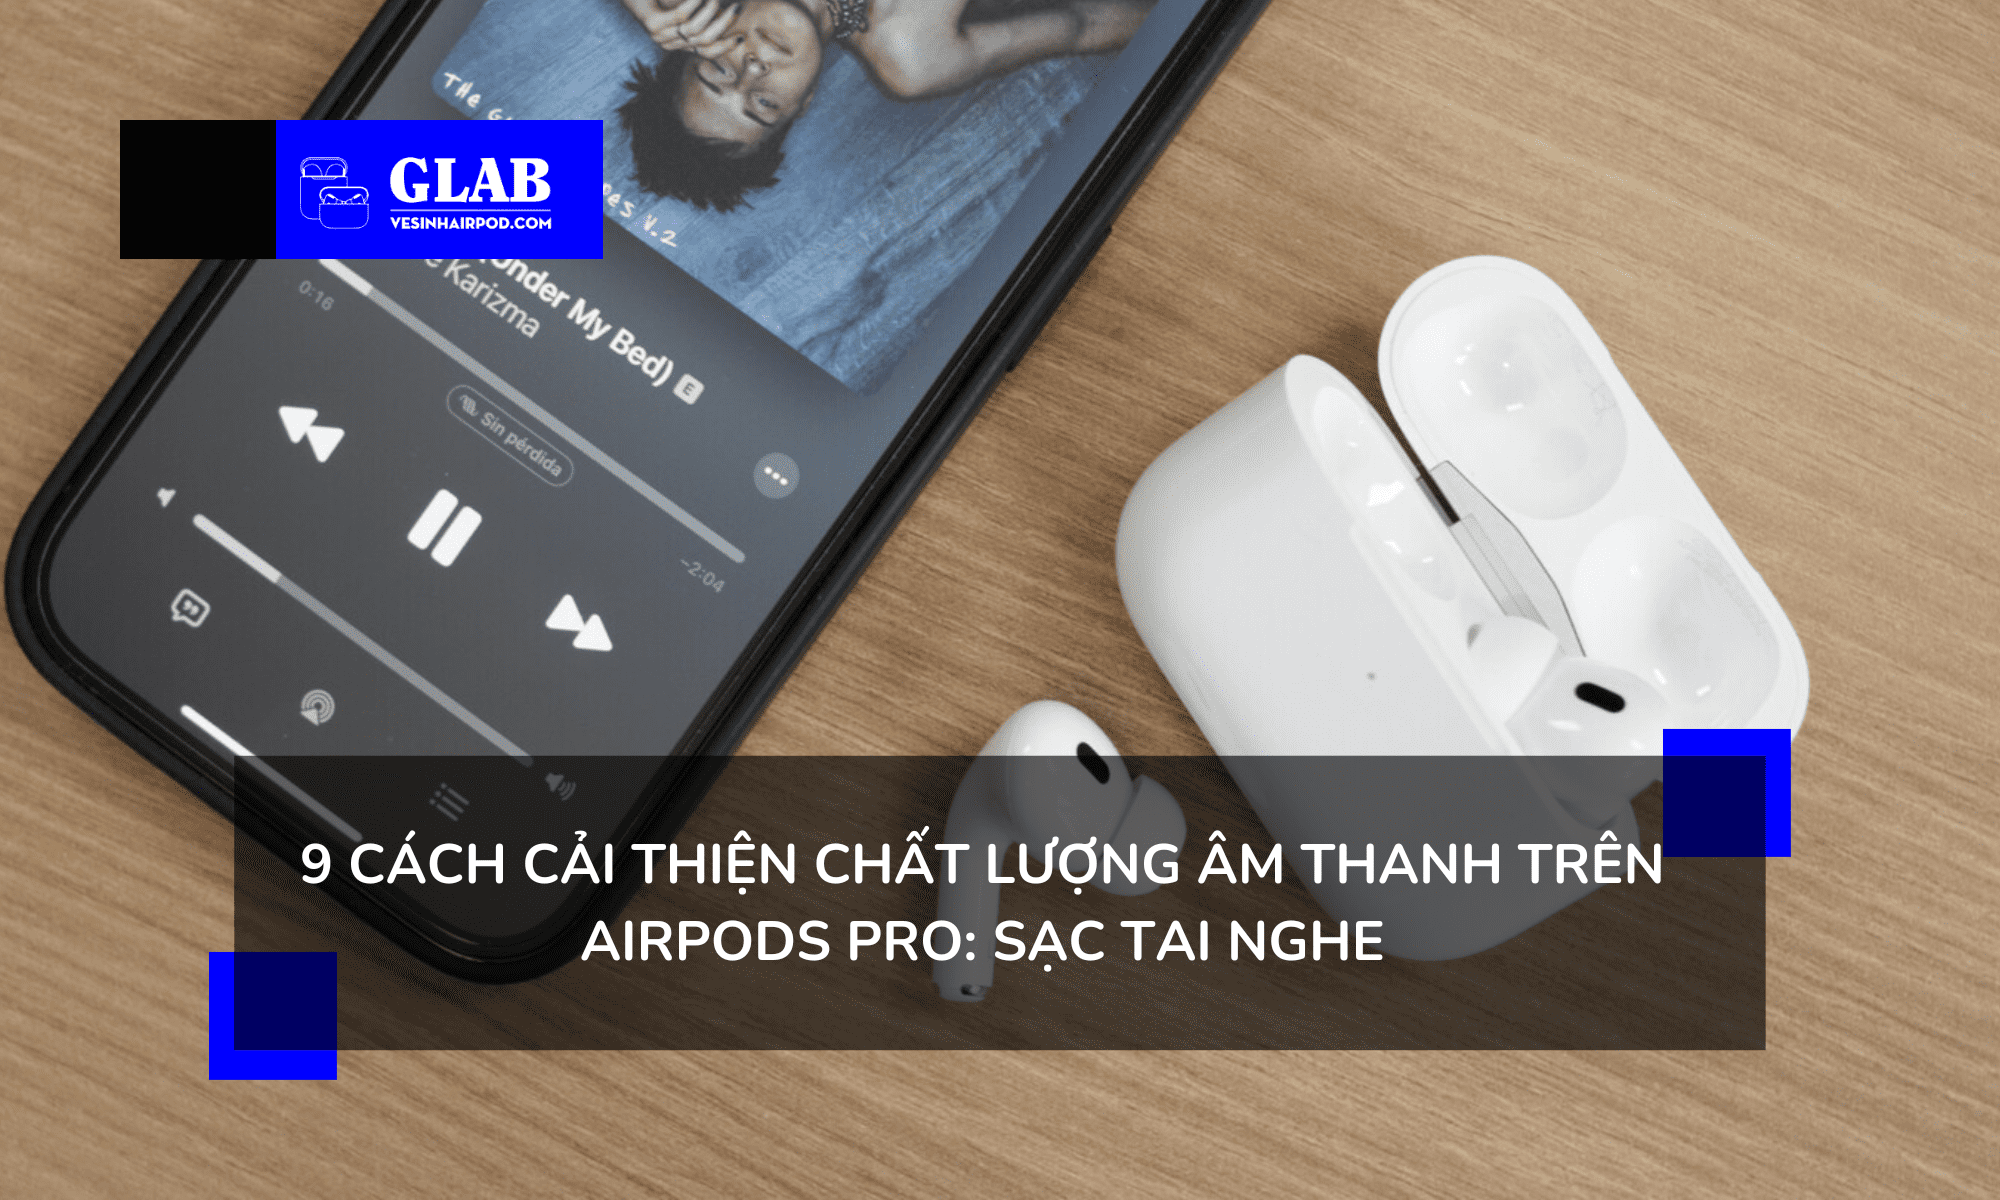 cai-thien-chat-luong-am-thanh-tren-airpods-pro